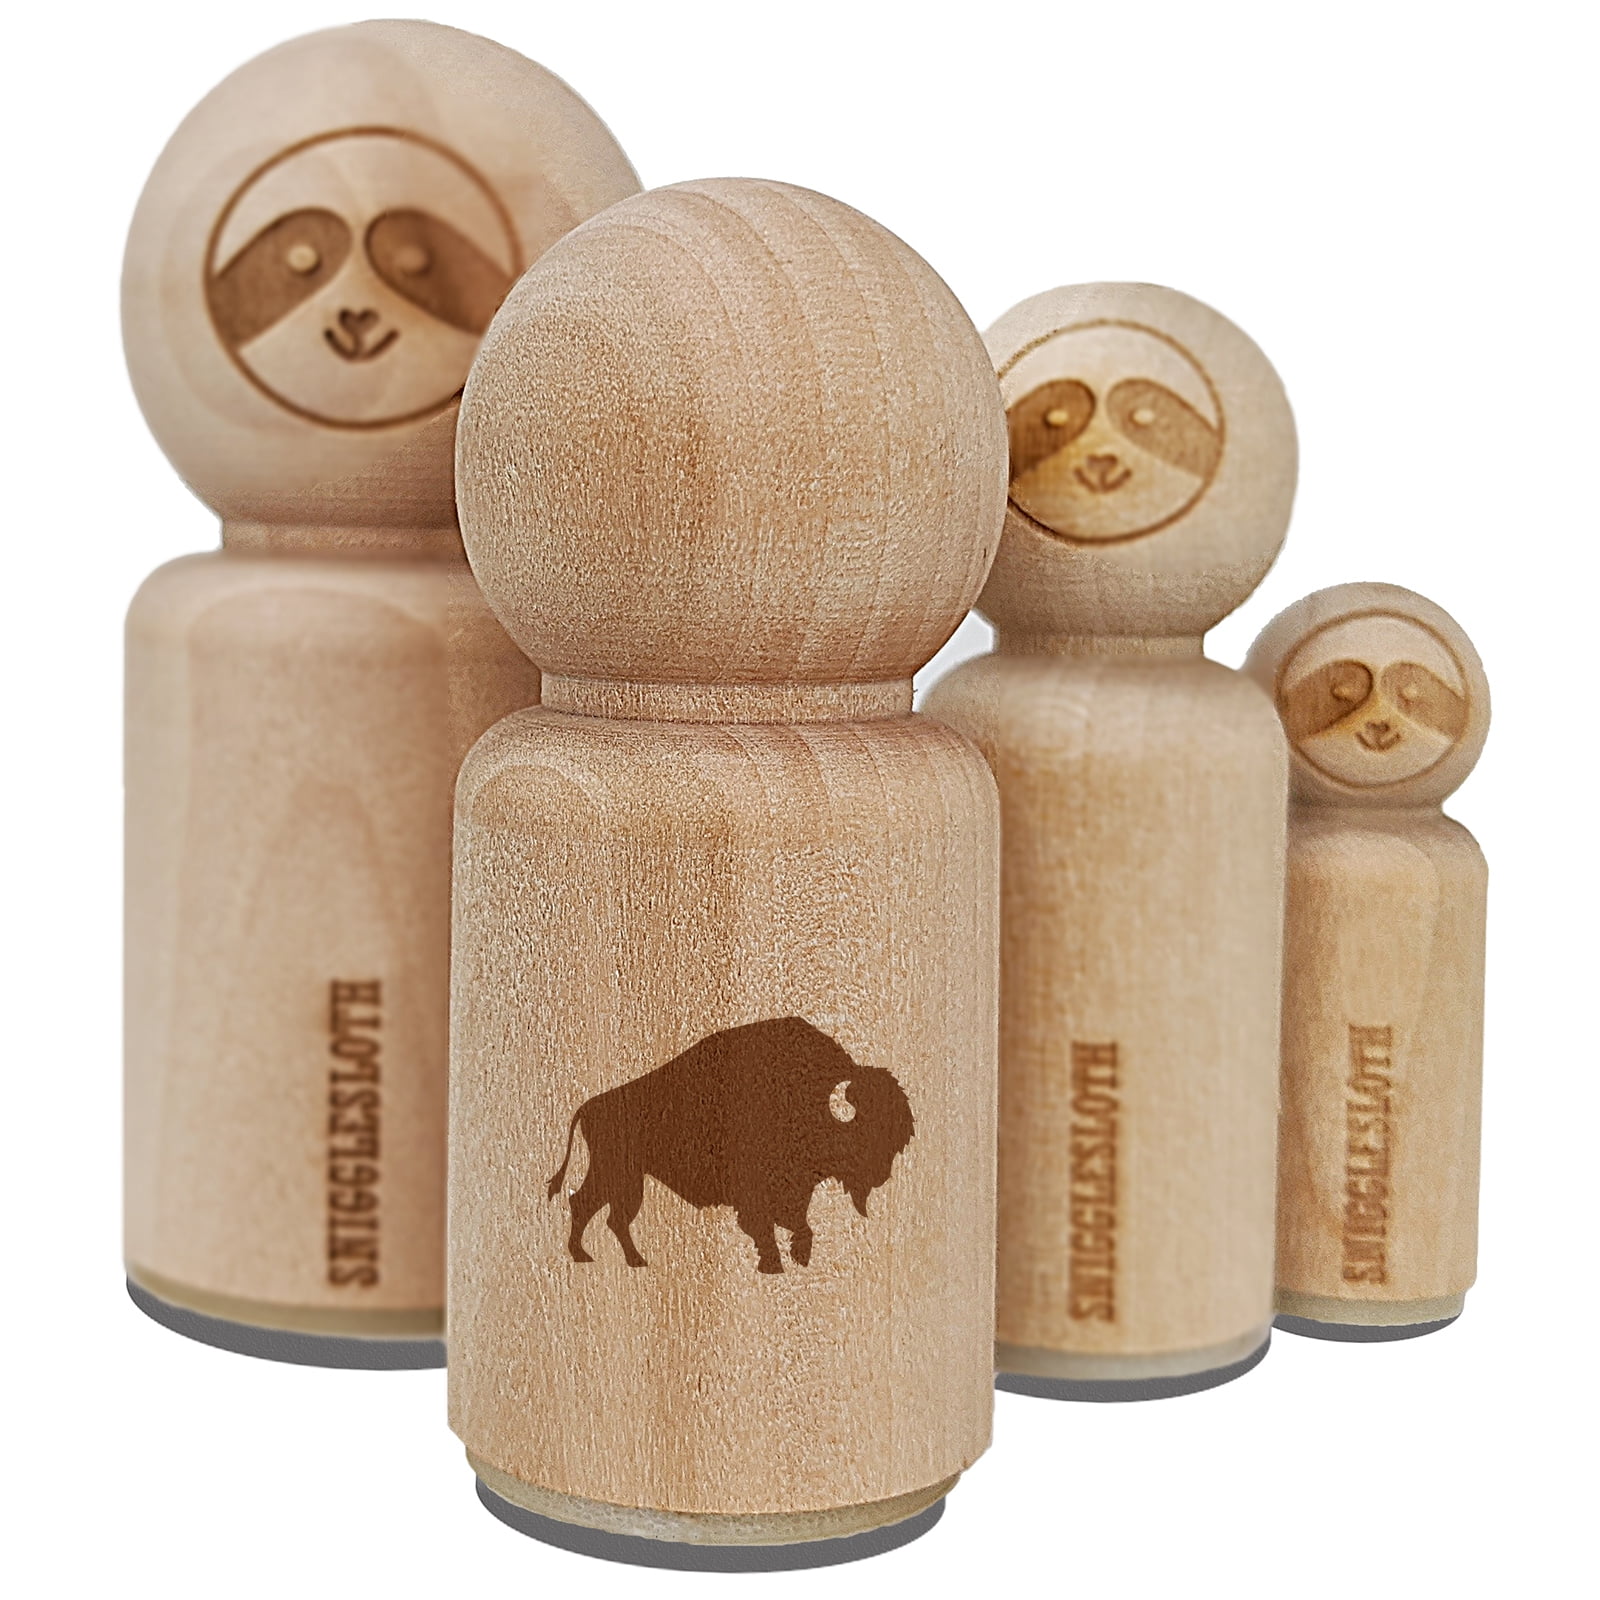 American Bison Buffalo Silhouette Rubber Stamp for Scrapbooking Crafting Stamping - Mini 1/2 Inch